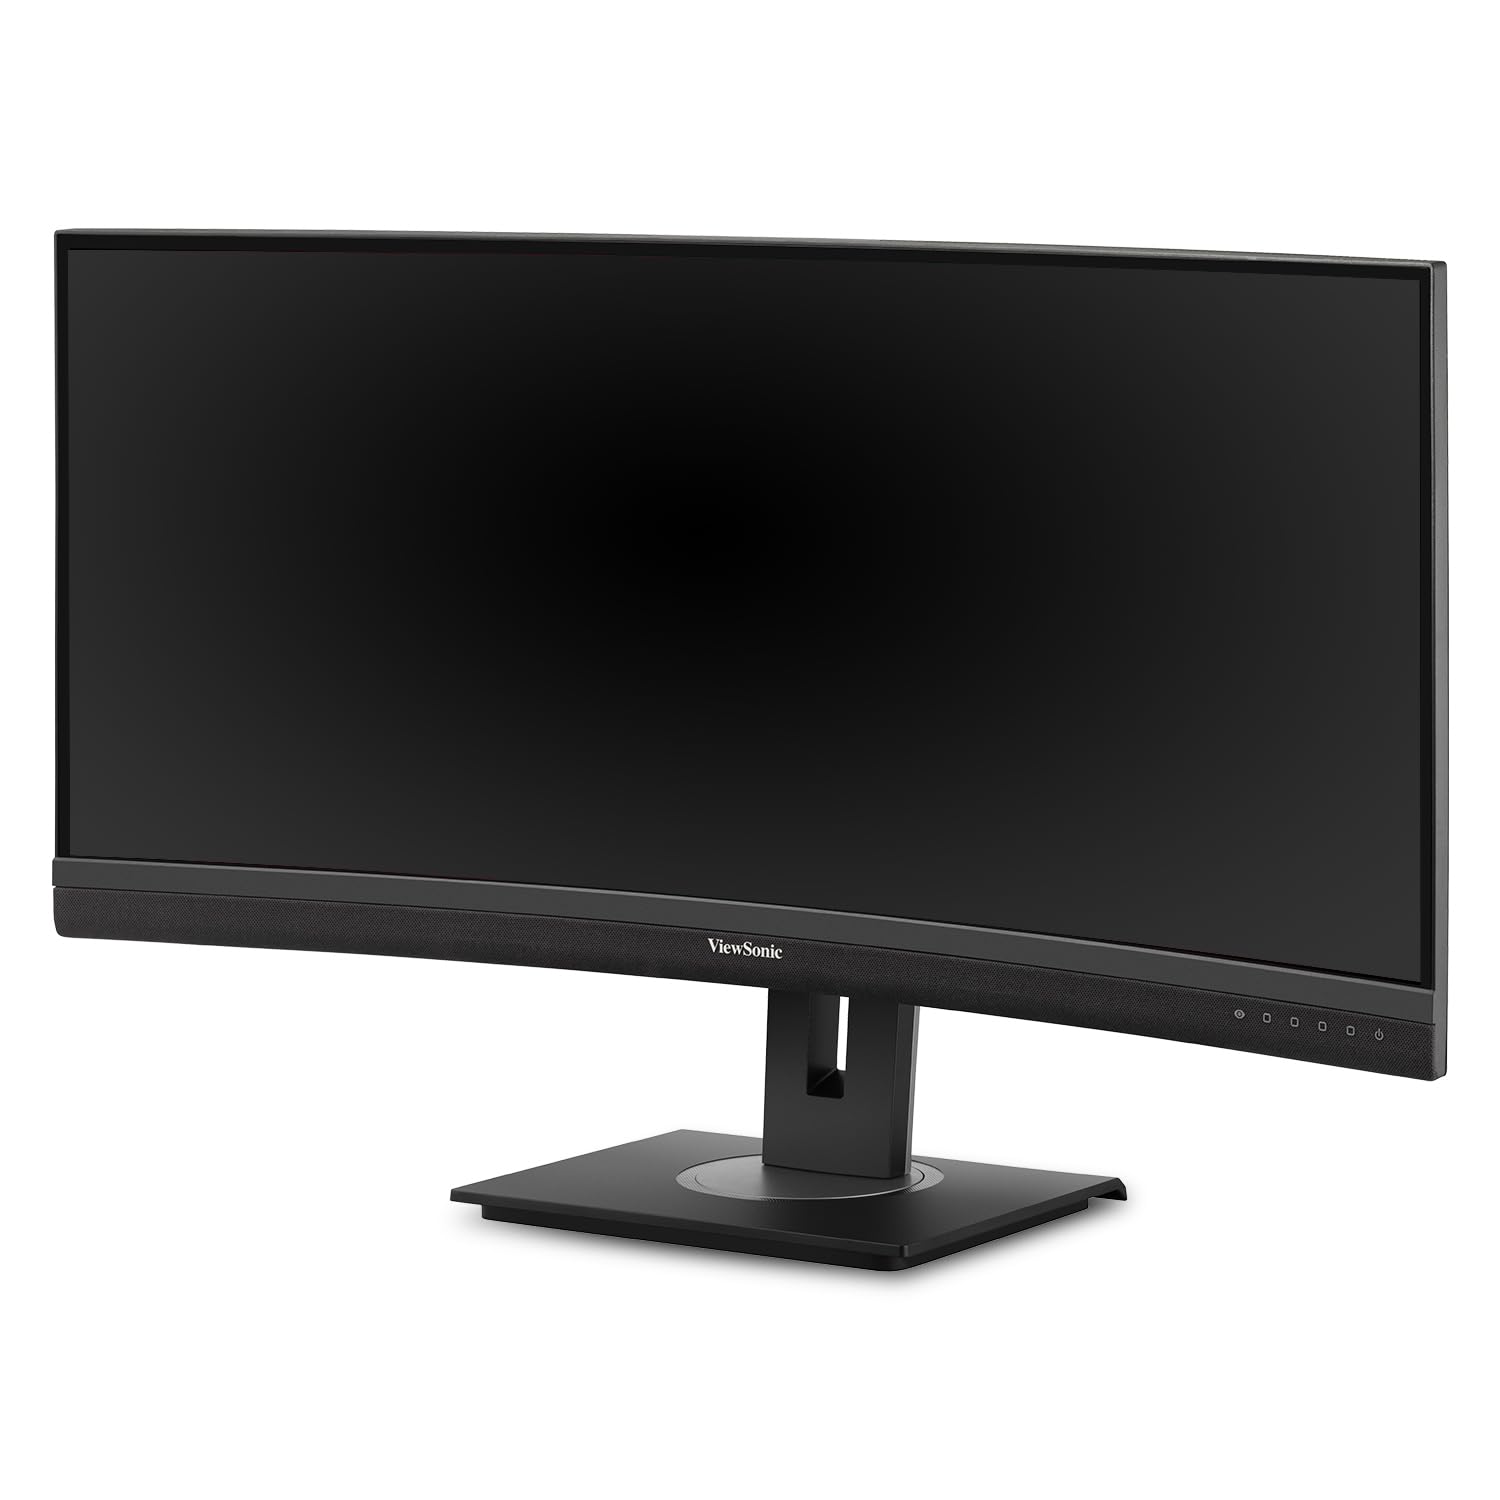 ViewSonic VG3456C 34 Inch 21:9 UltraWide QHD 1440p Curved Monitor with Ergonomics Design, USB C Docking Built-in, Gigabit Ethernet for Home and Office